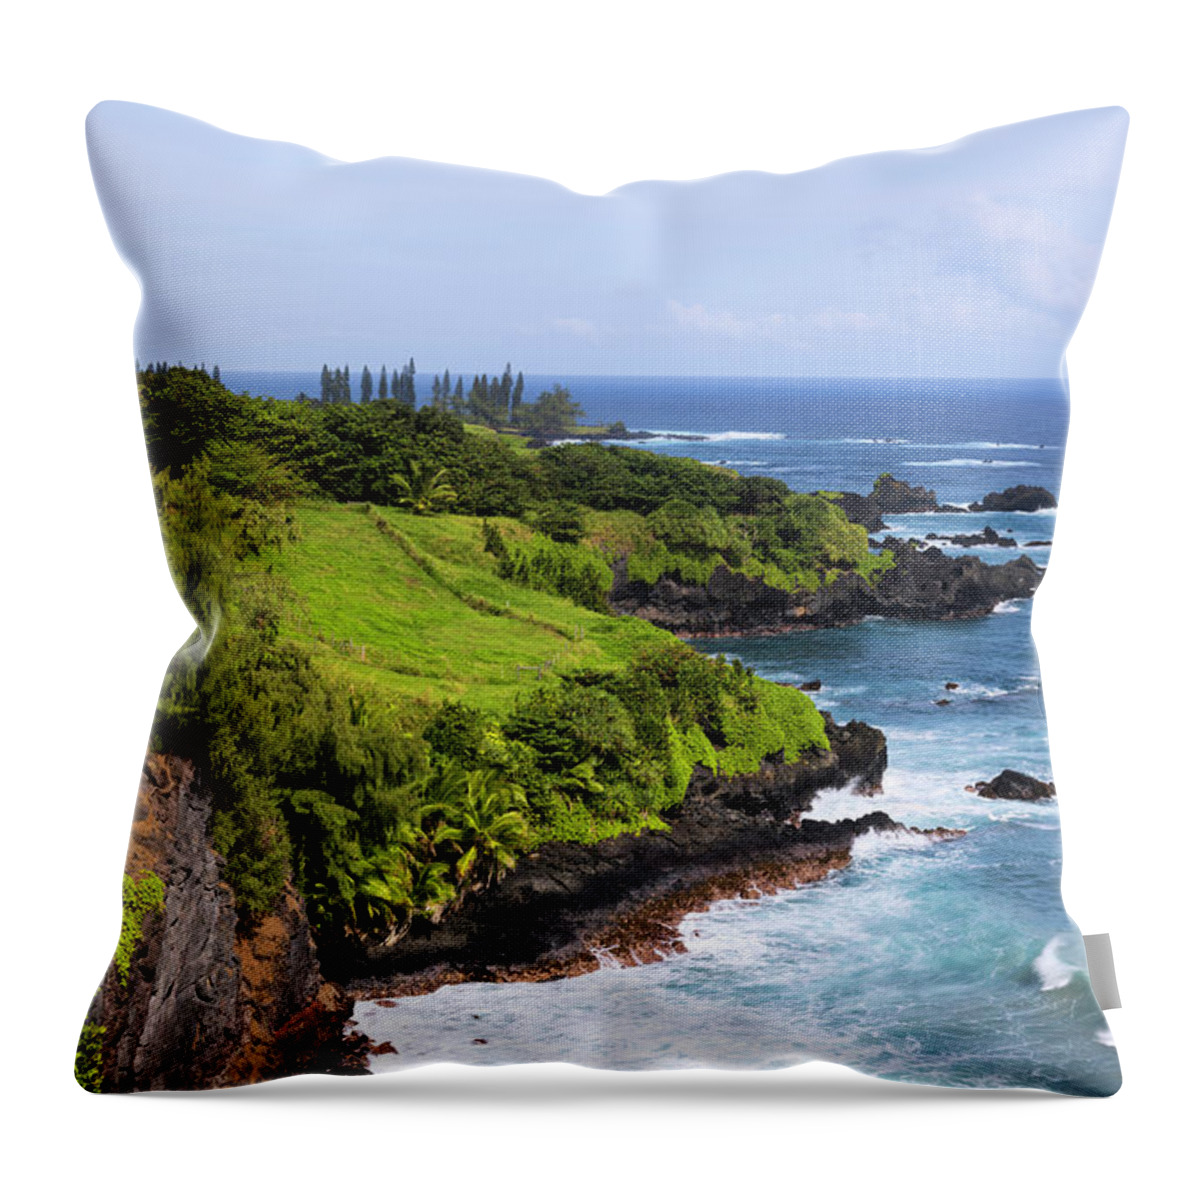 Maui Throw Pillow featuring the photograph Maui by Chad Dutson